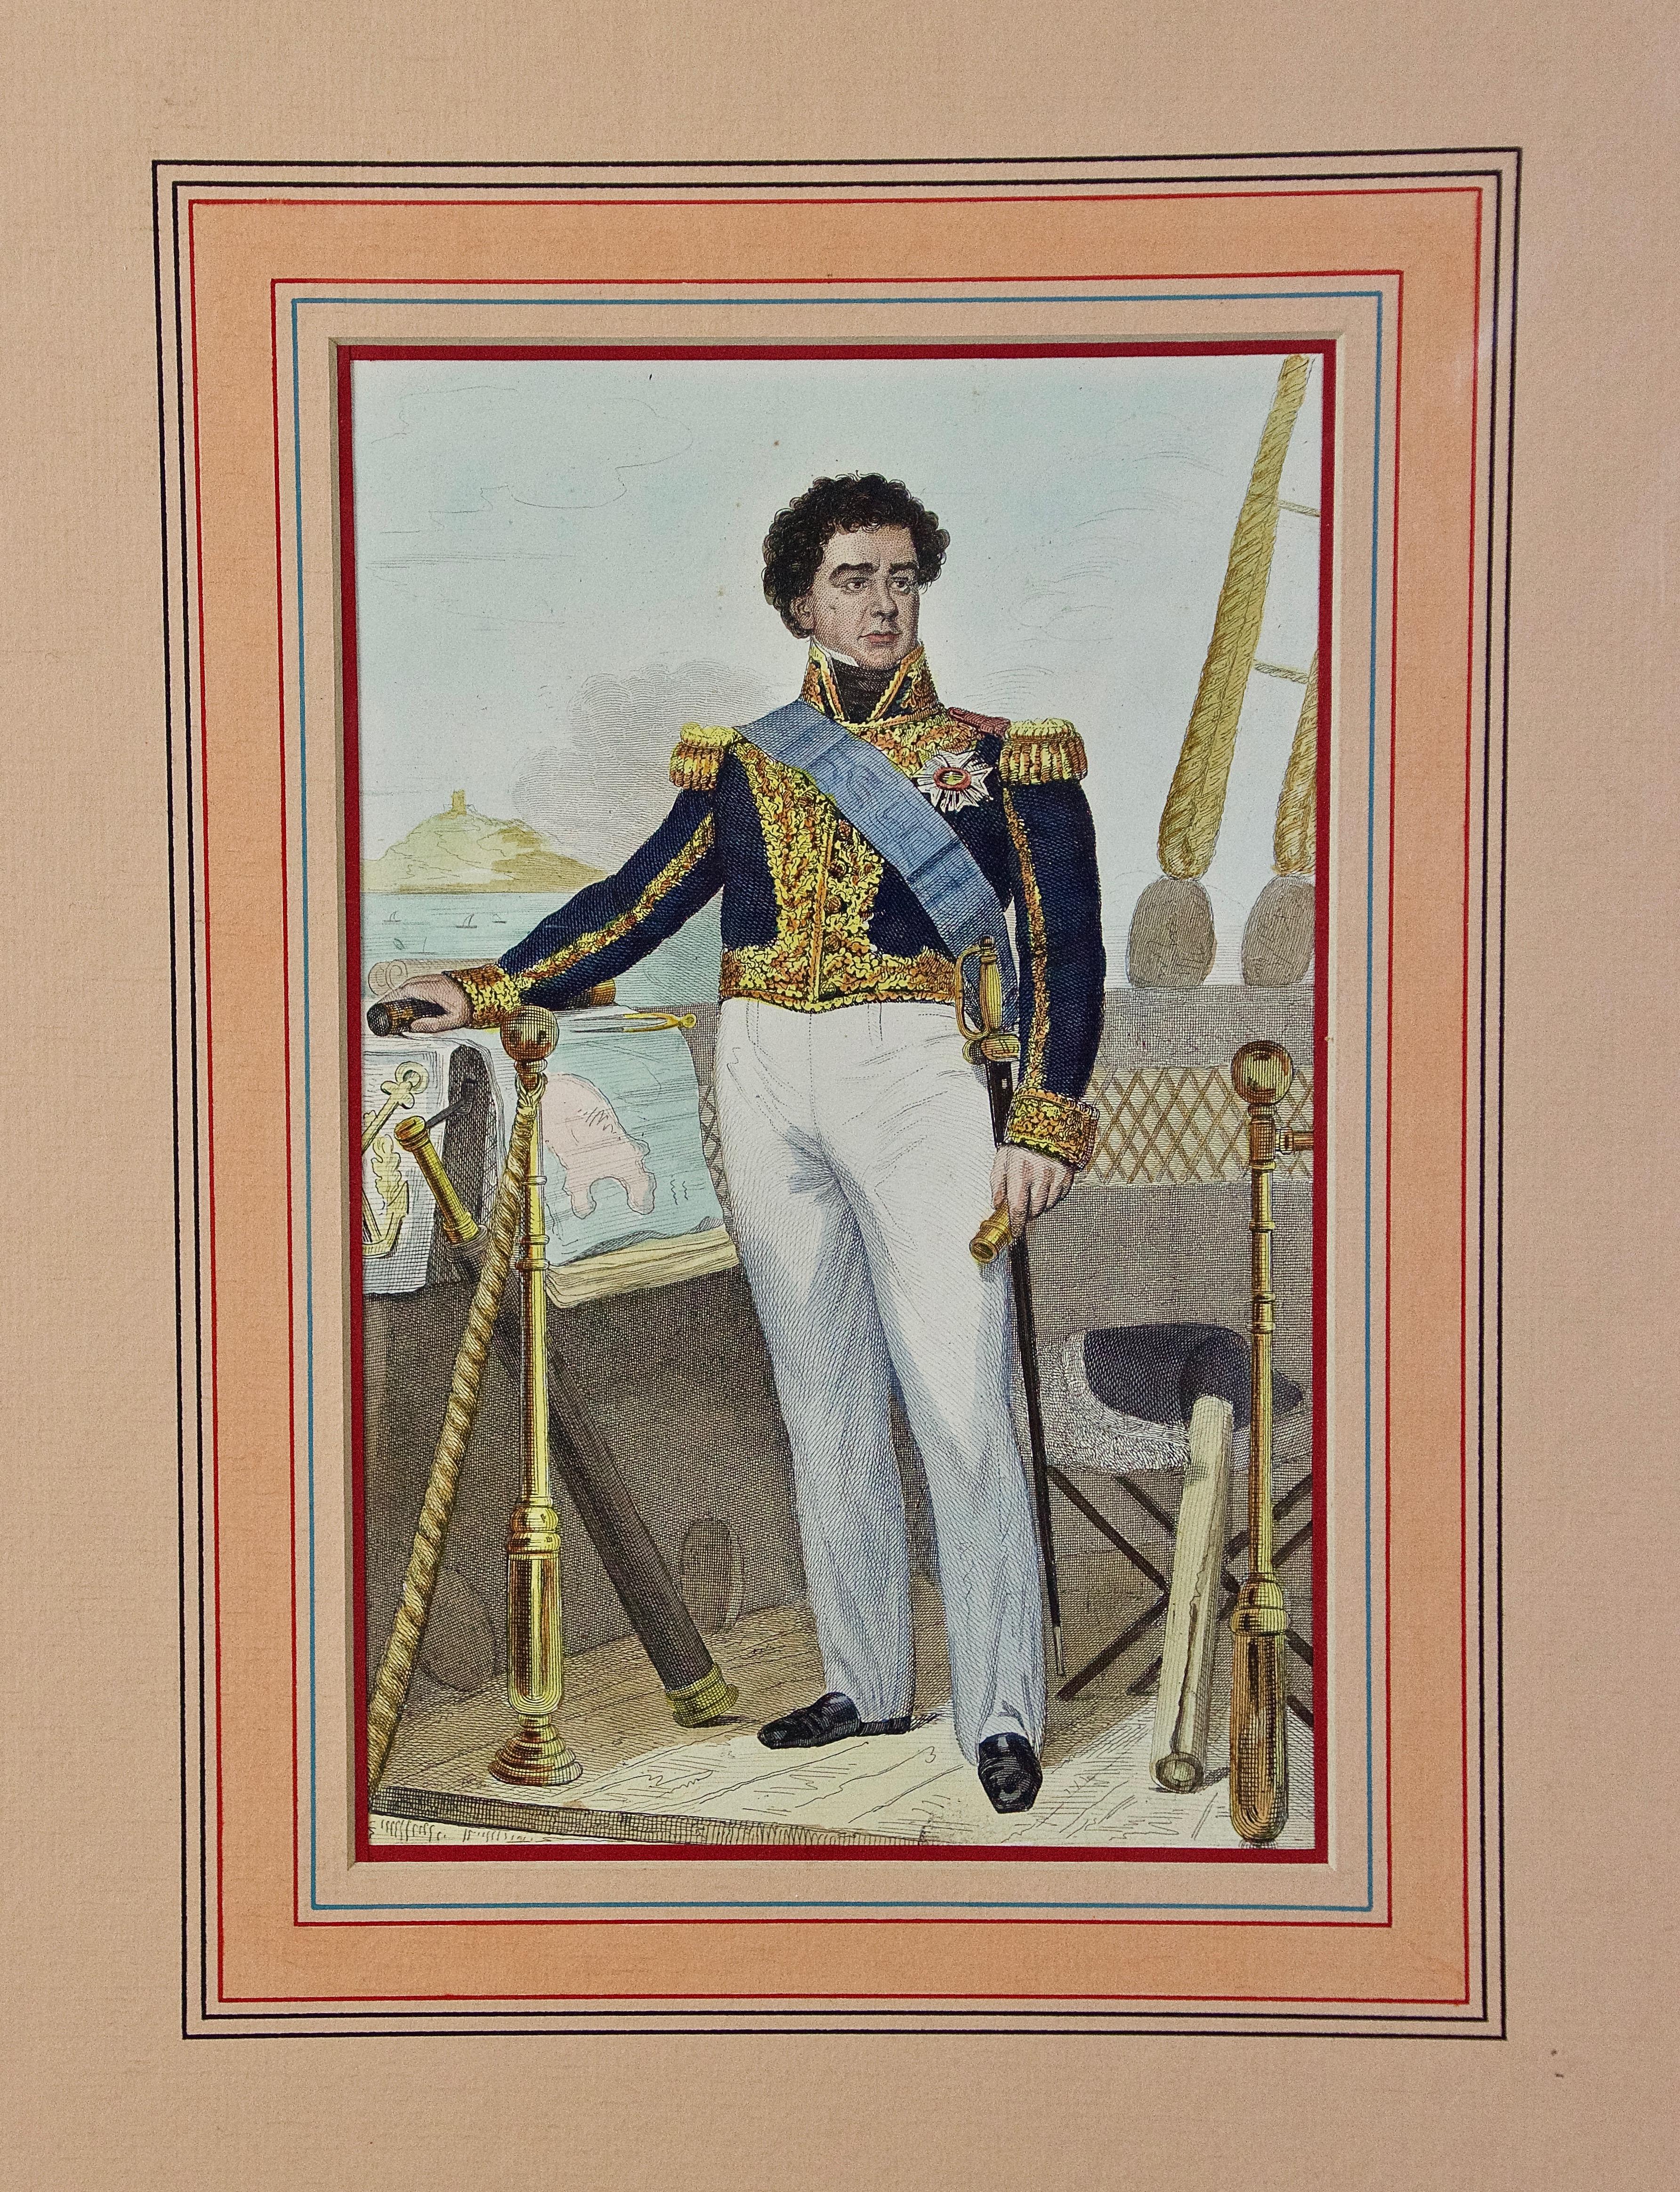 Joseph-Désiré Court Portrait Print - Antique Hand Colored Steel Engraving of the Commodore of the Navy under Napoleon